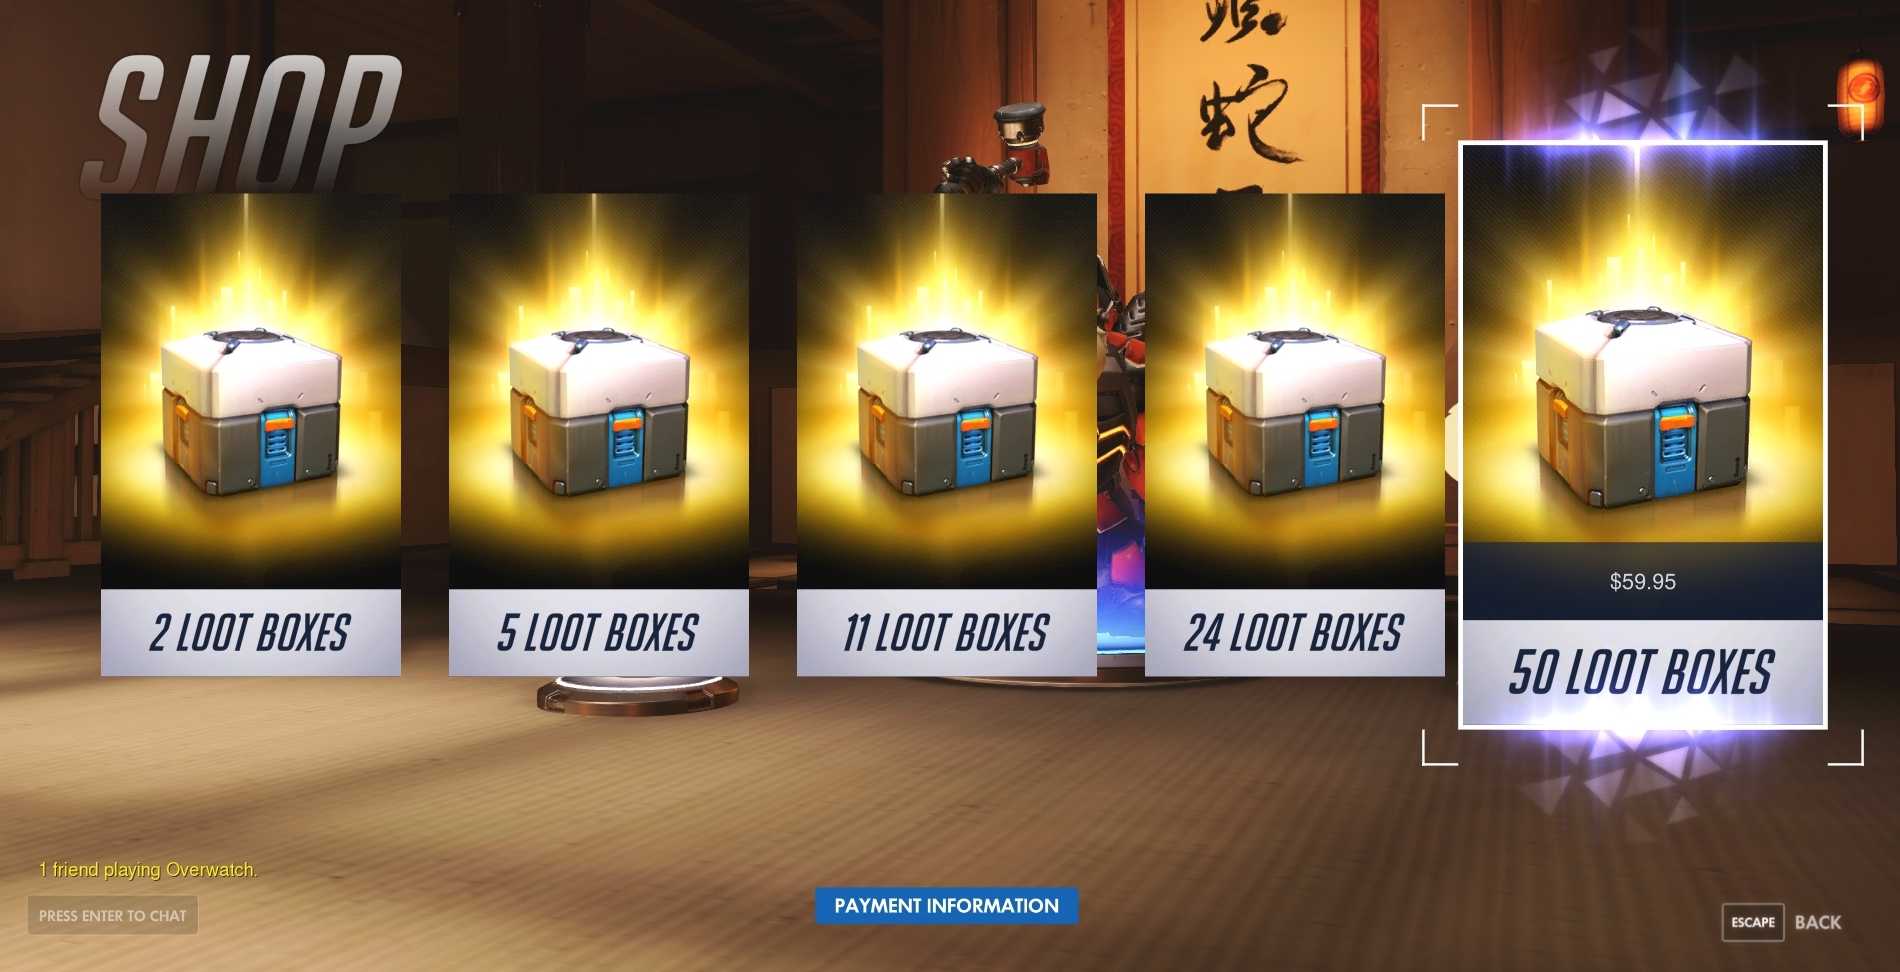 Loot+boxes+are+an+unfortunate+side-effect+of+modern+gaming+practices